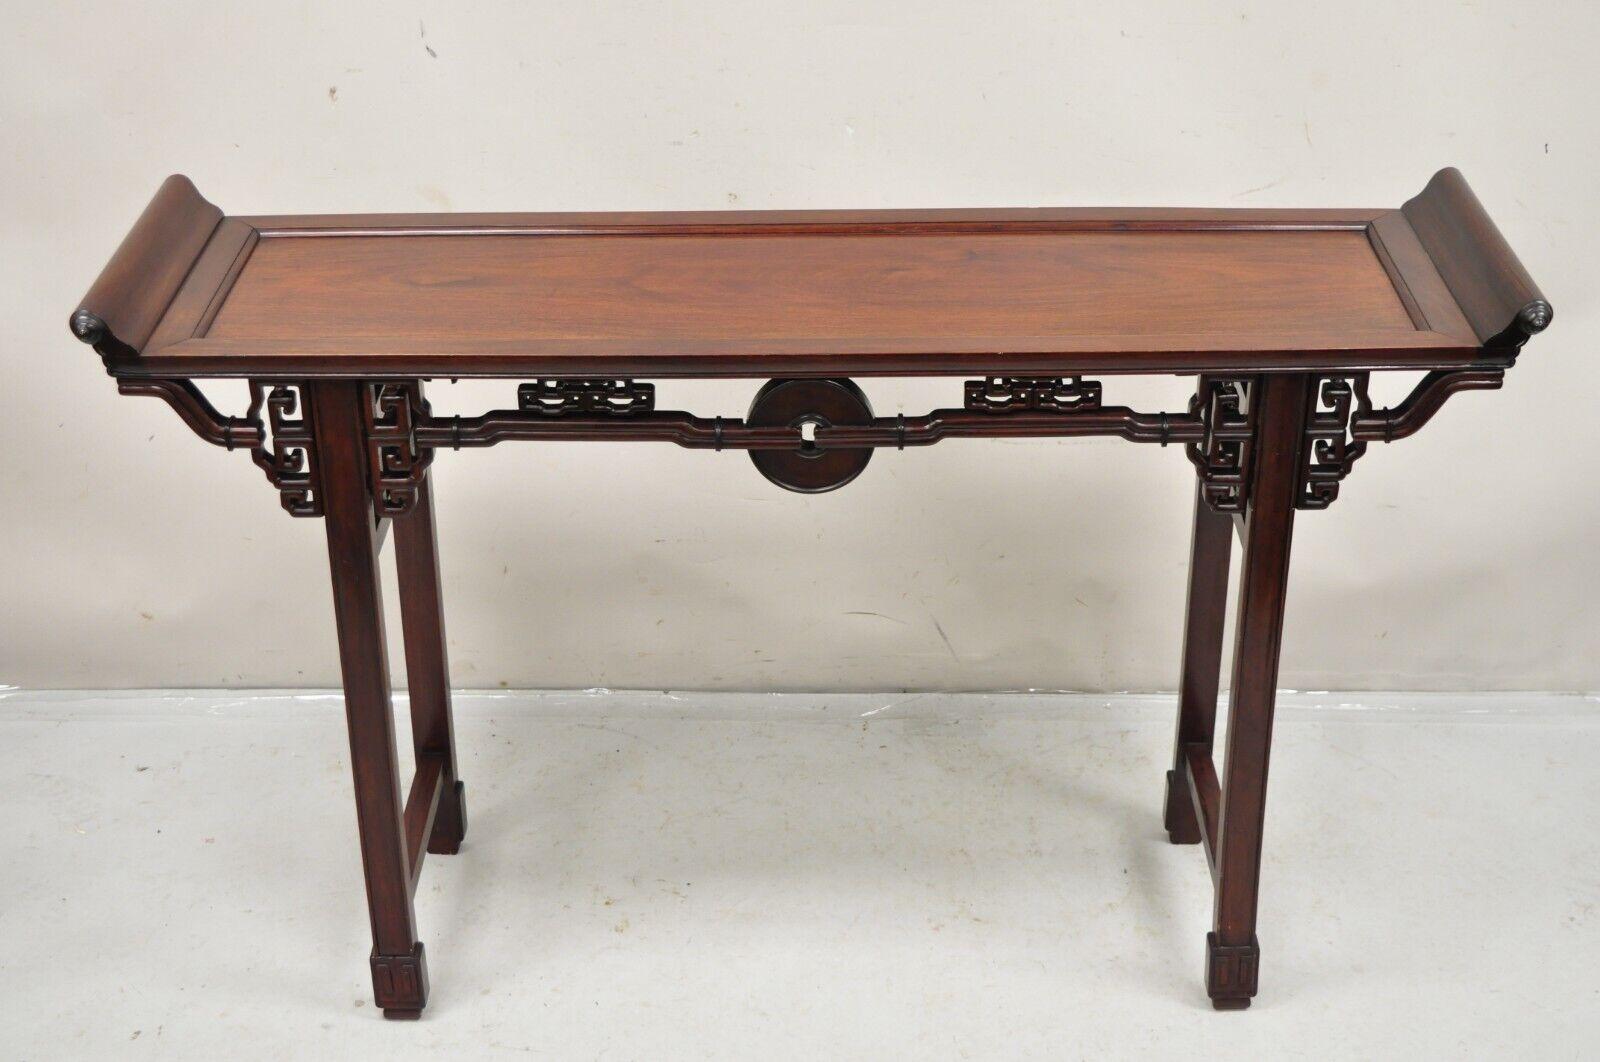 Vintage Chinese Oriental Fretwork Carved Hardwood Altar Console Table. Item Circa Mid to Late 20th Century.
Measurements: 34